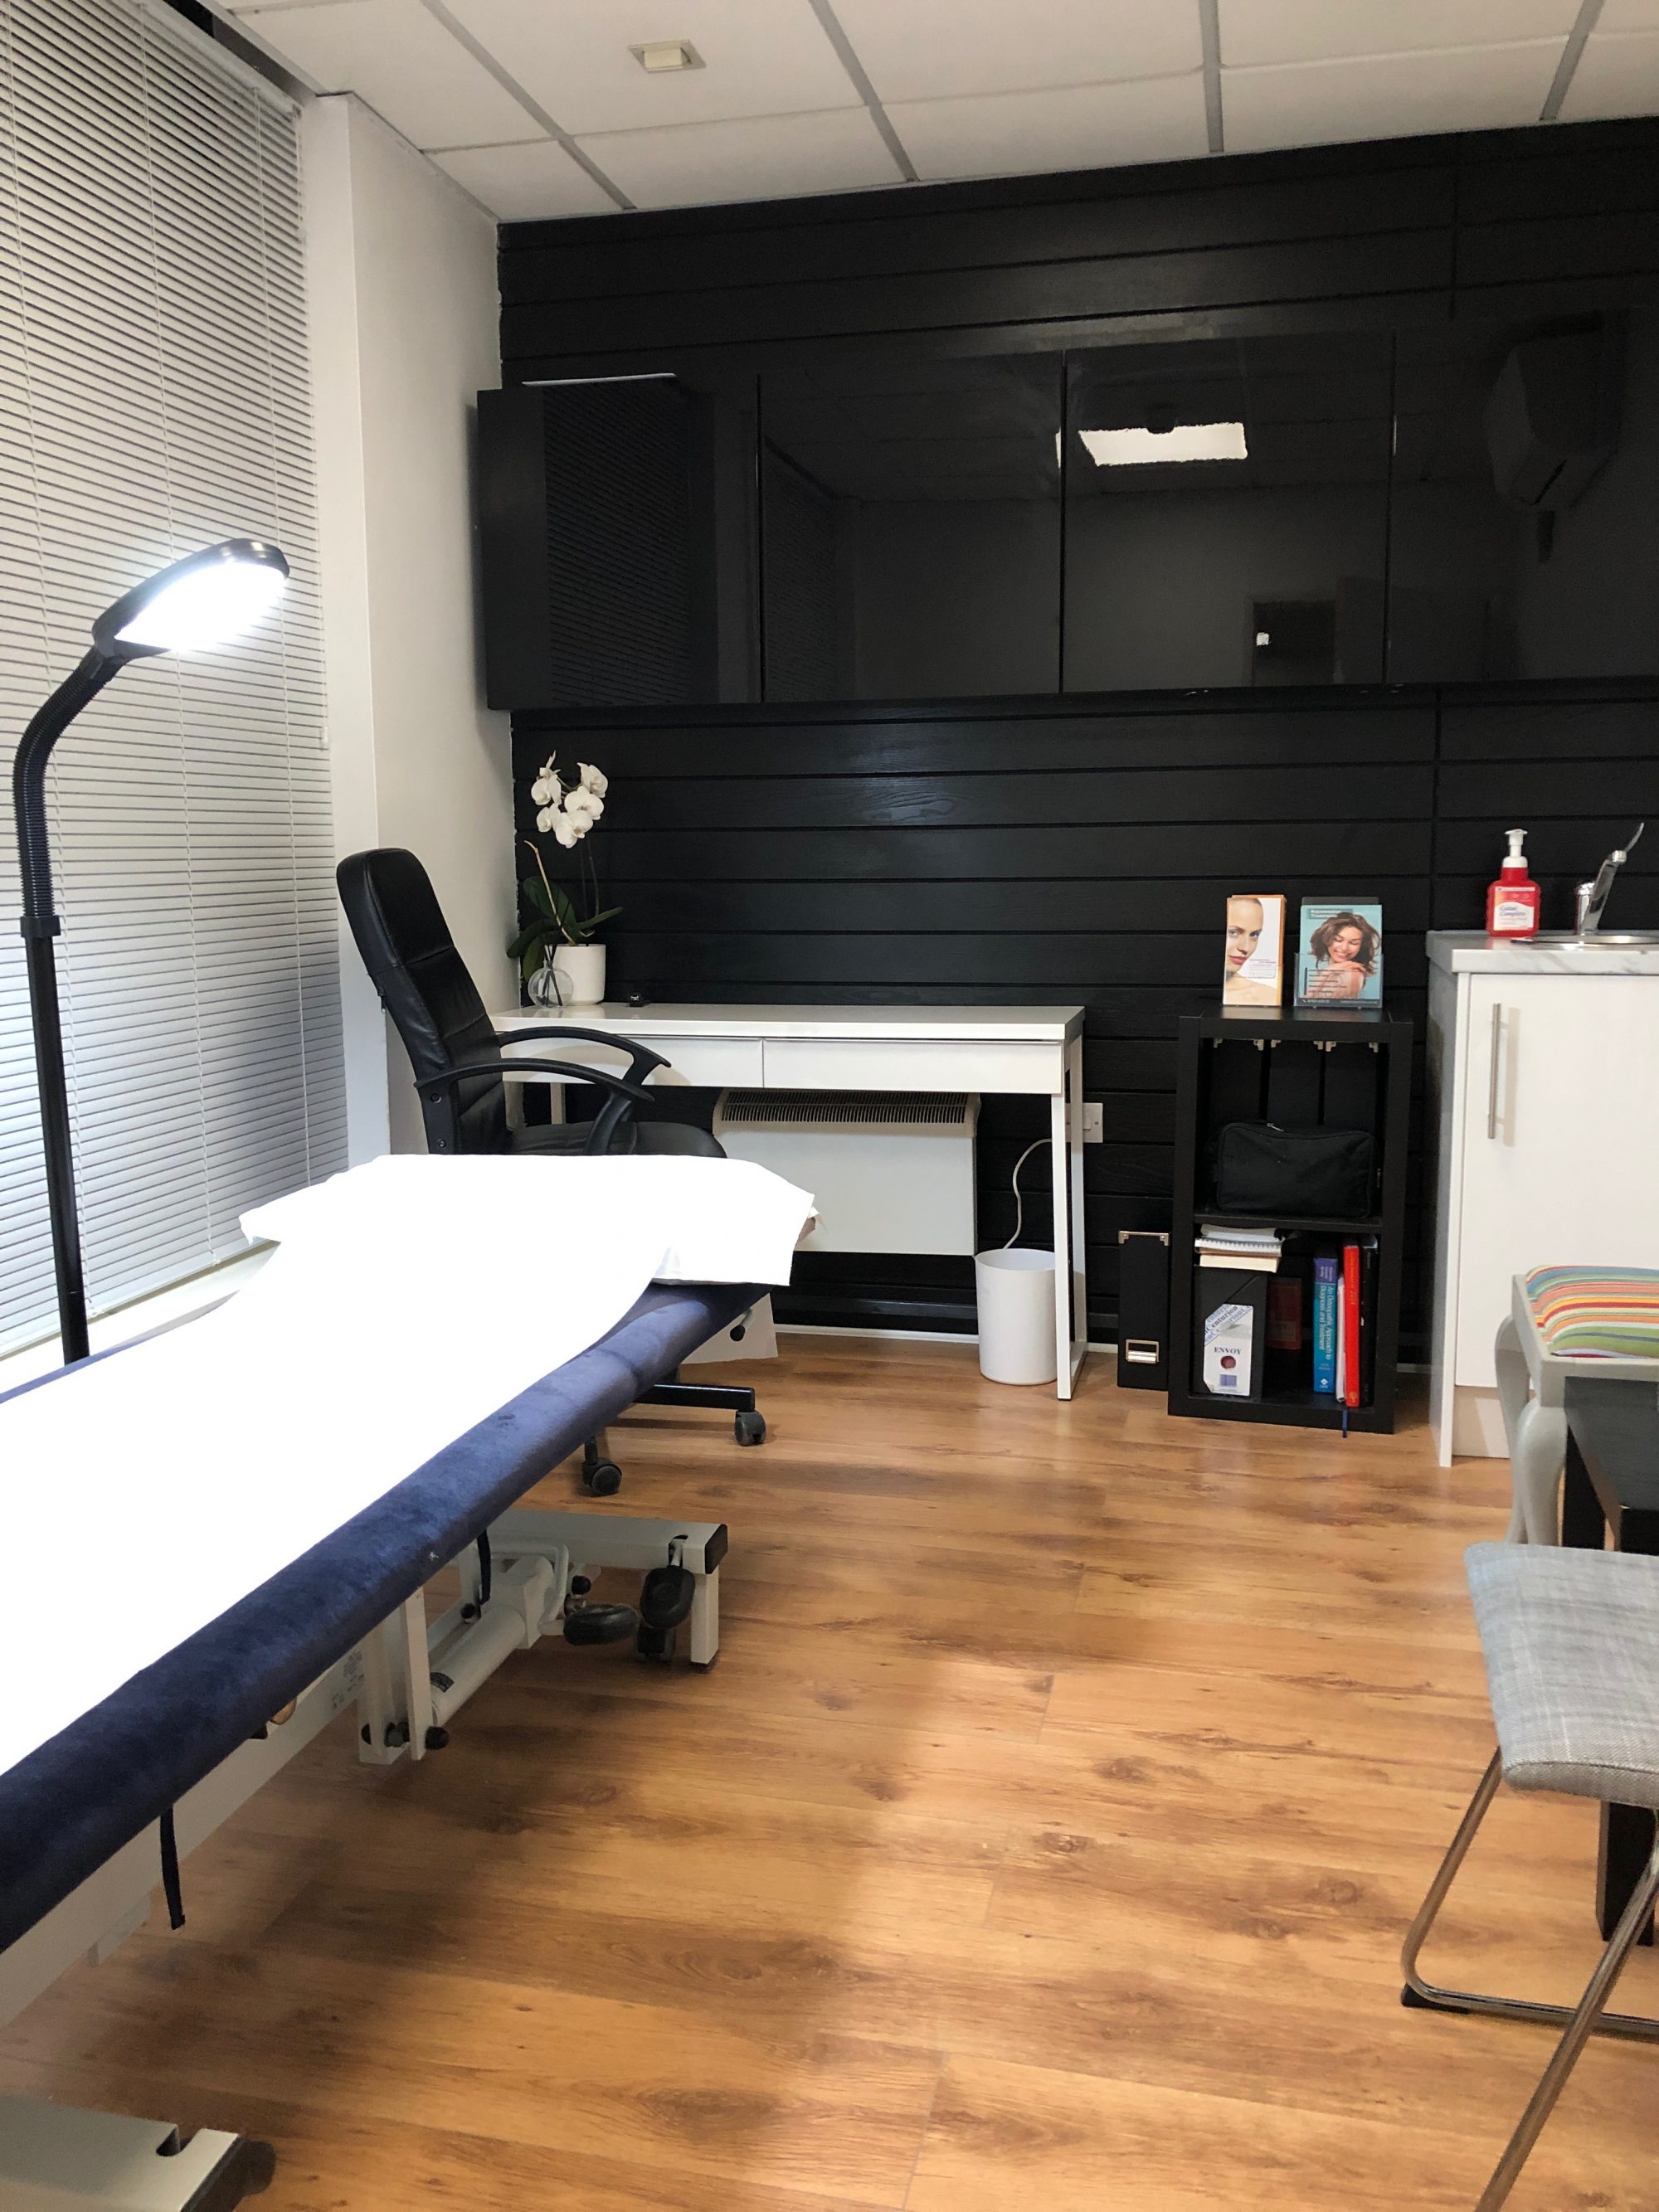 Watford Osteopathy Acupuncture Massage Therapy Room Better Care